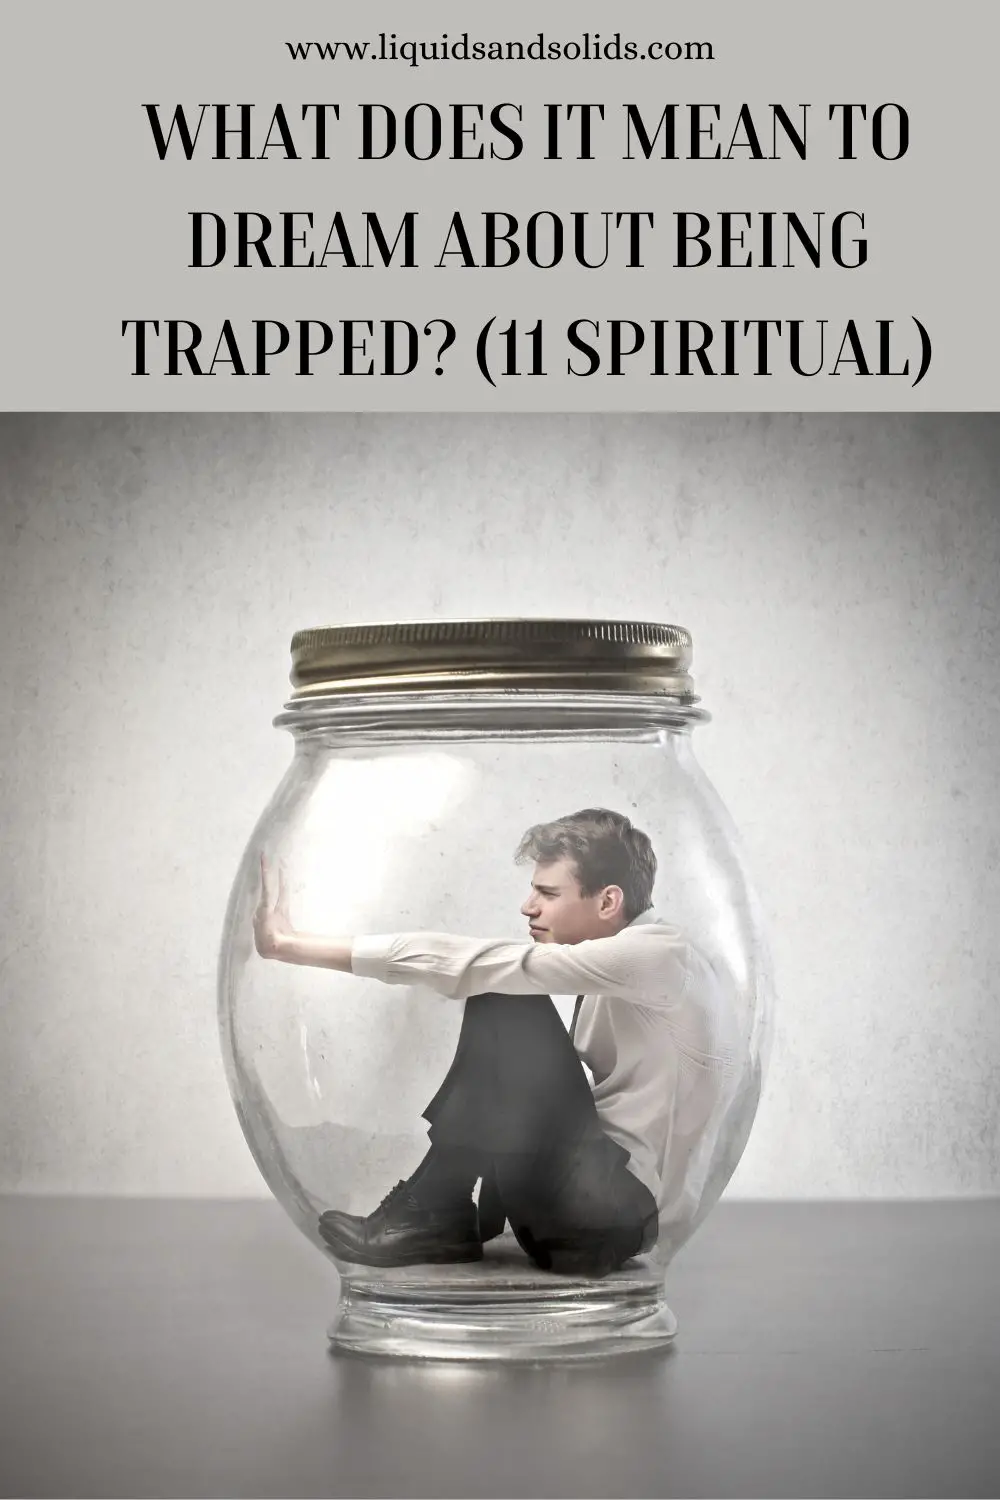 Spiritual Meaning Of Being Trapped In Dreams